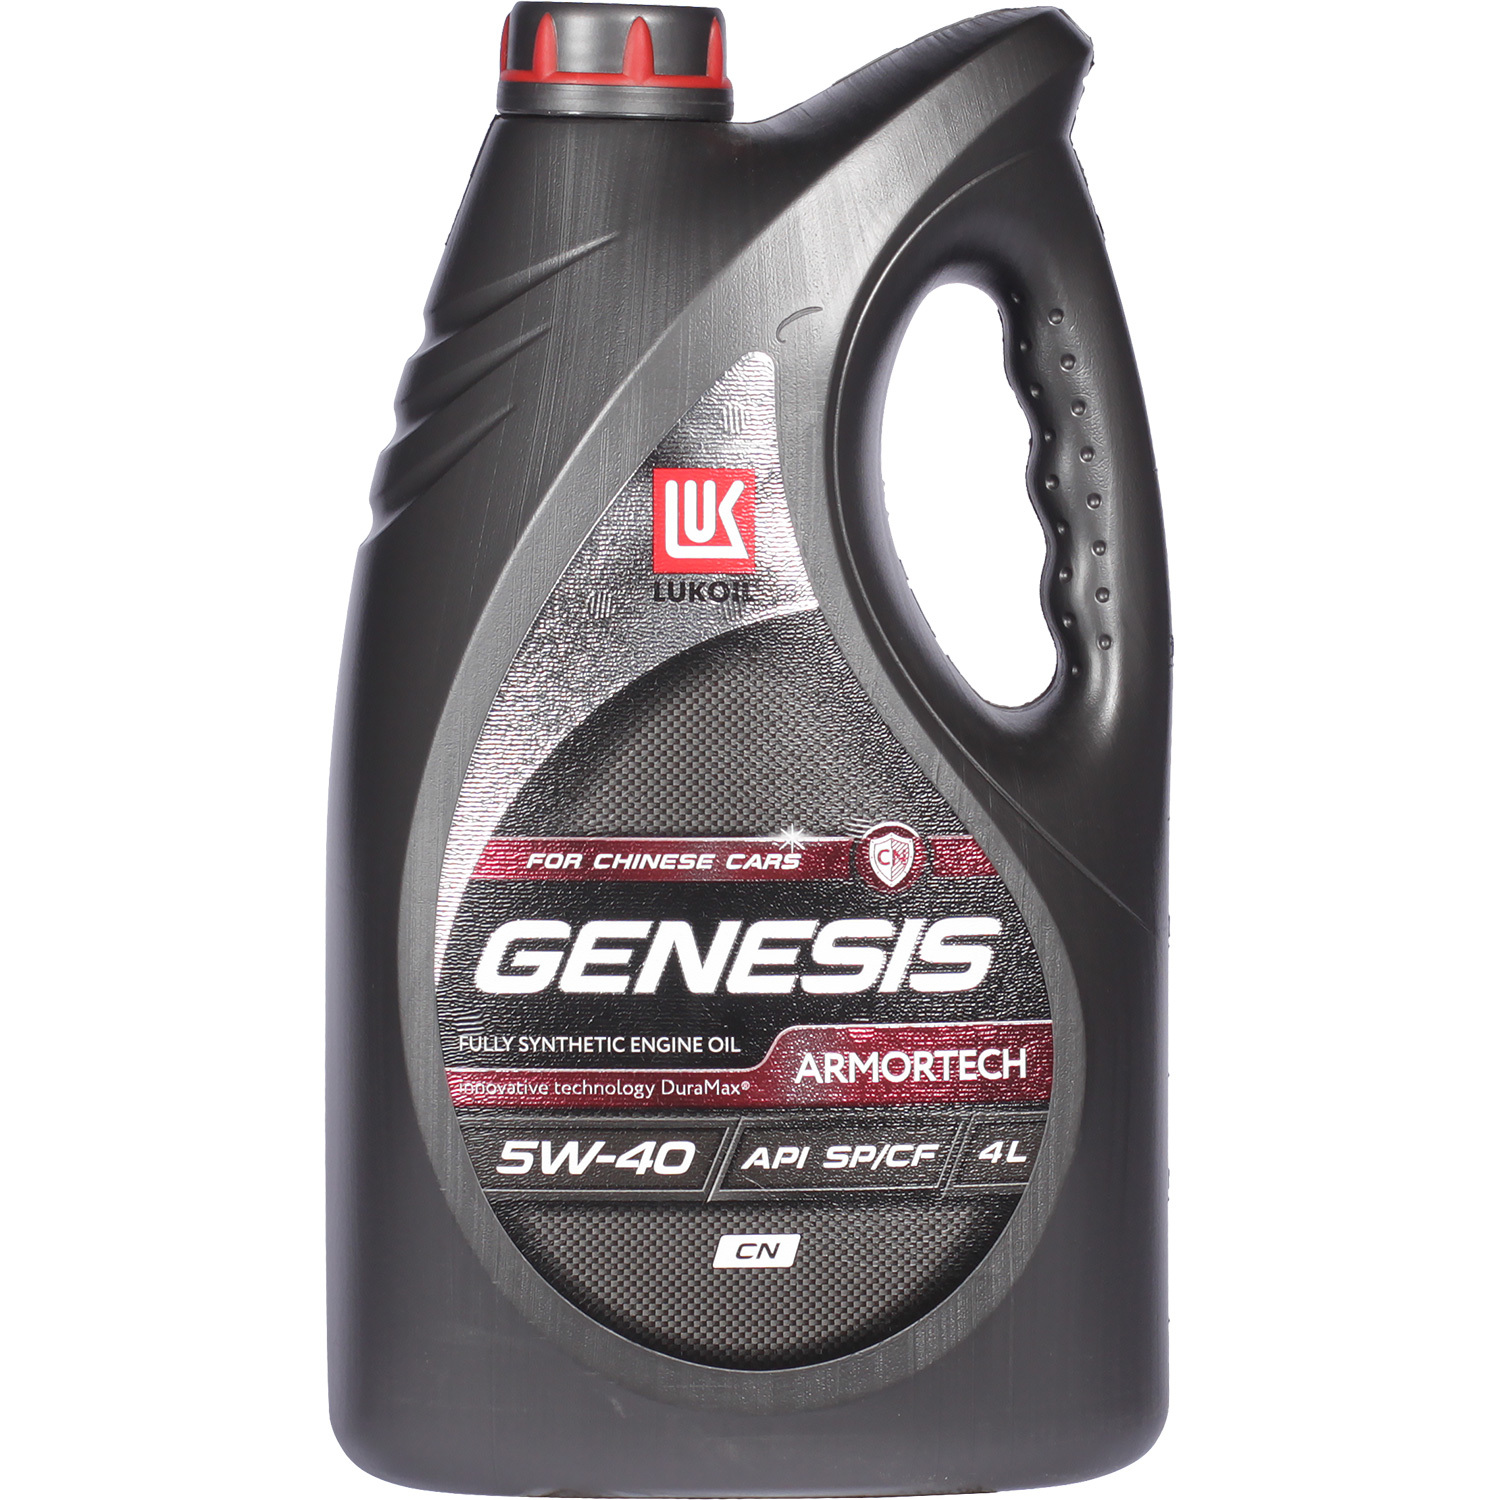 Lukoil Моторное масло Lukoil Genesis Armortech CN (for Chinese cars) 5W-40, 4 л